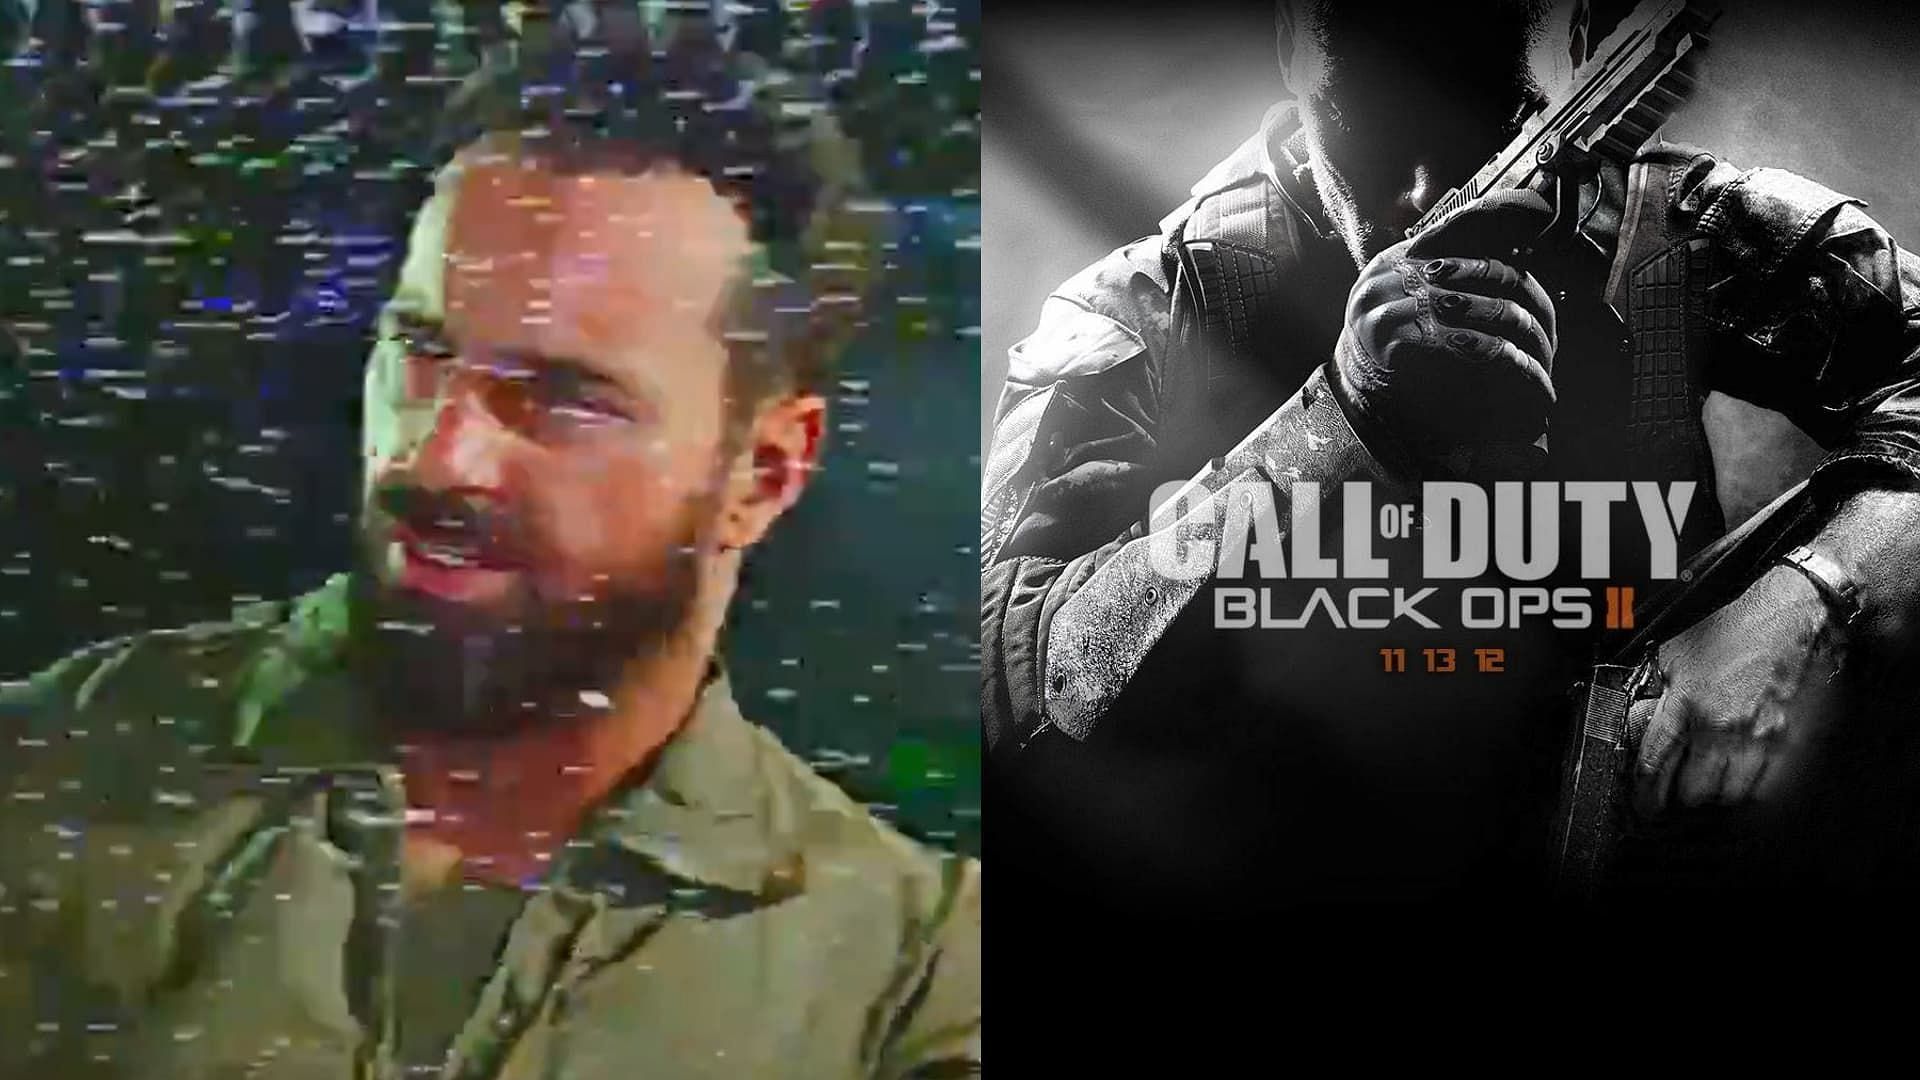 Black Ops 6 cutscene in Warzone reveals connection to Black Ops 2